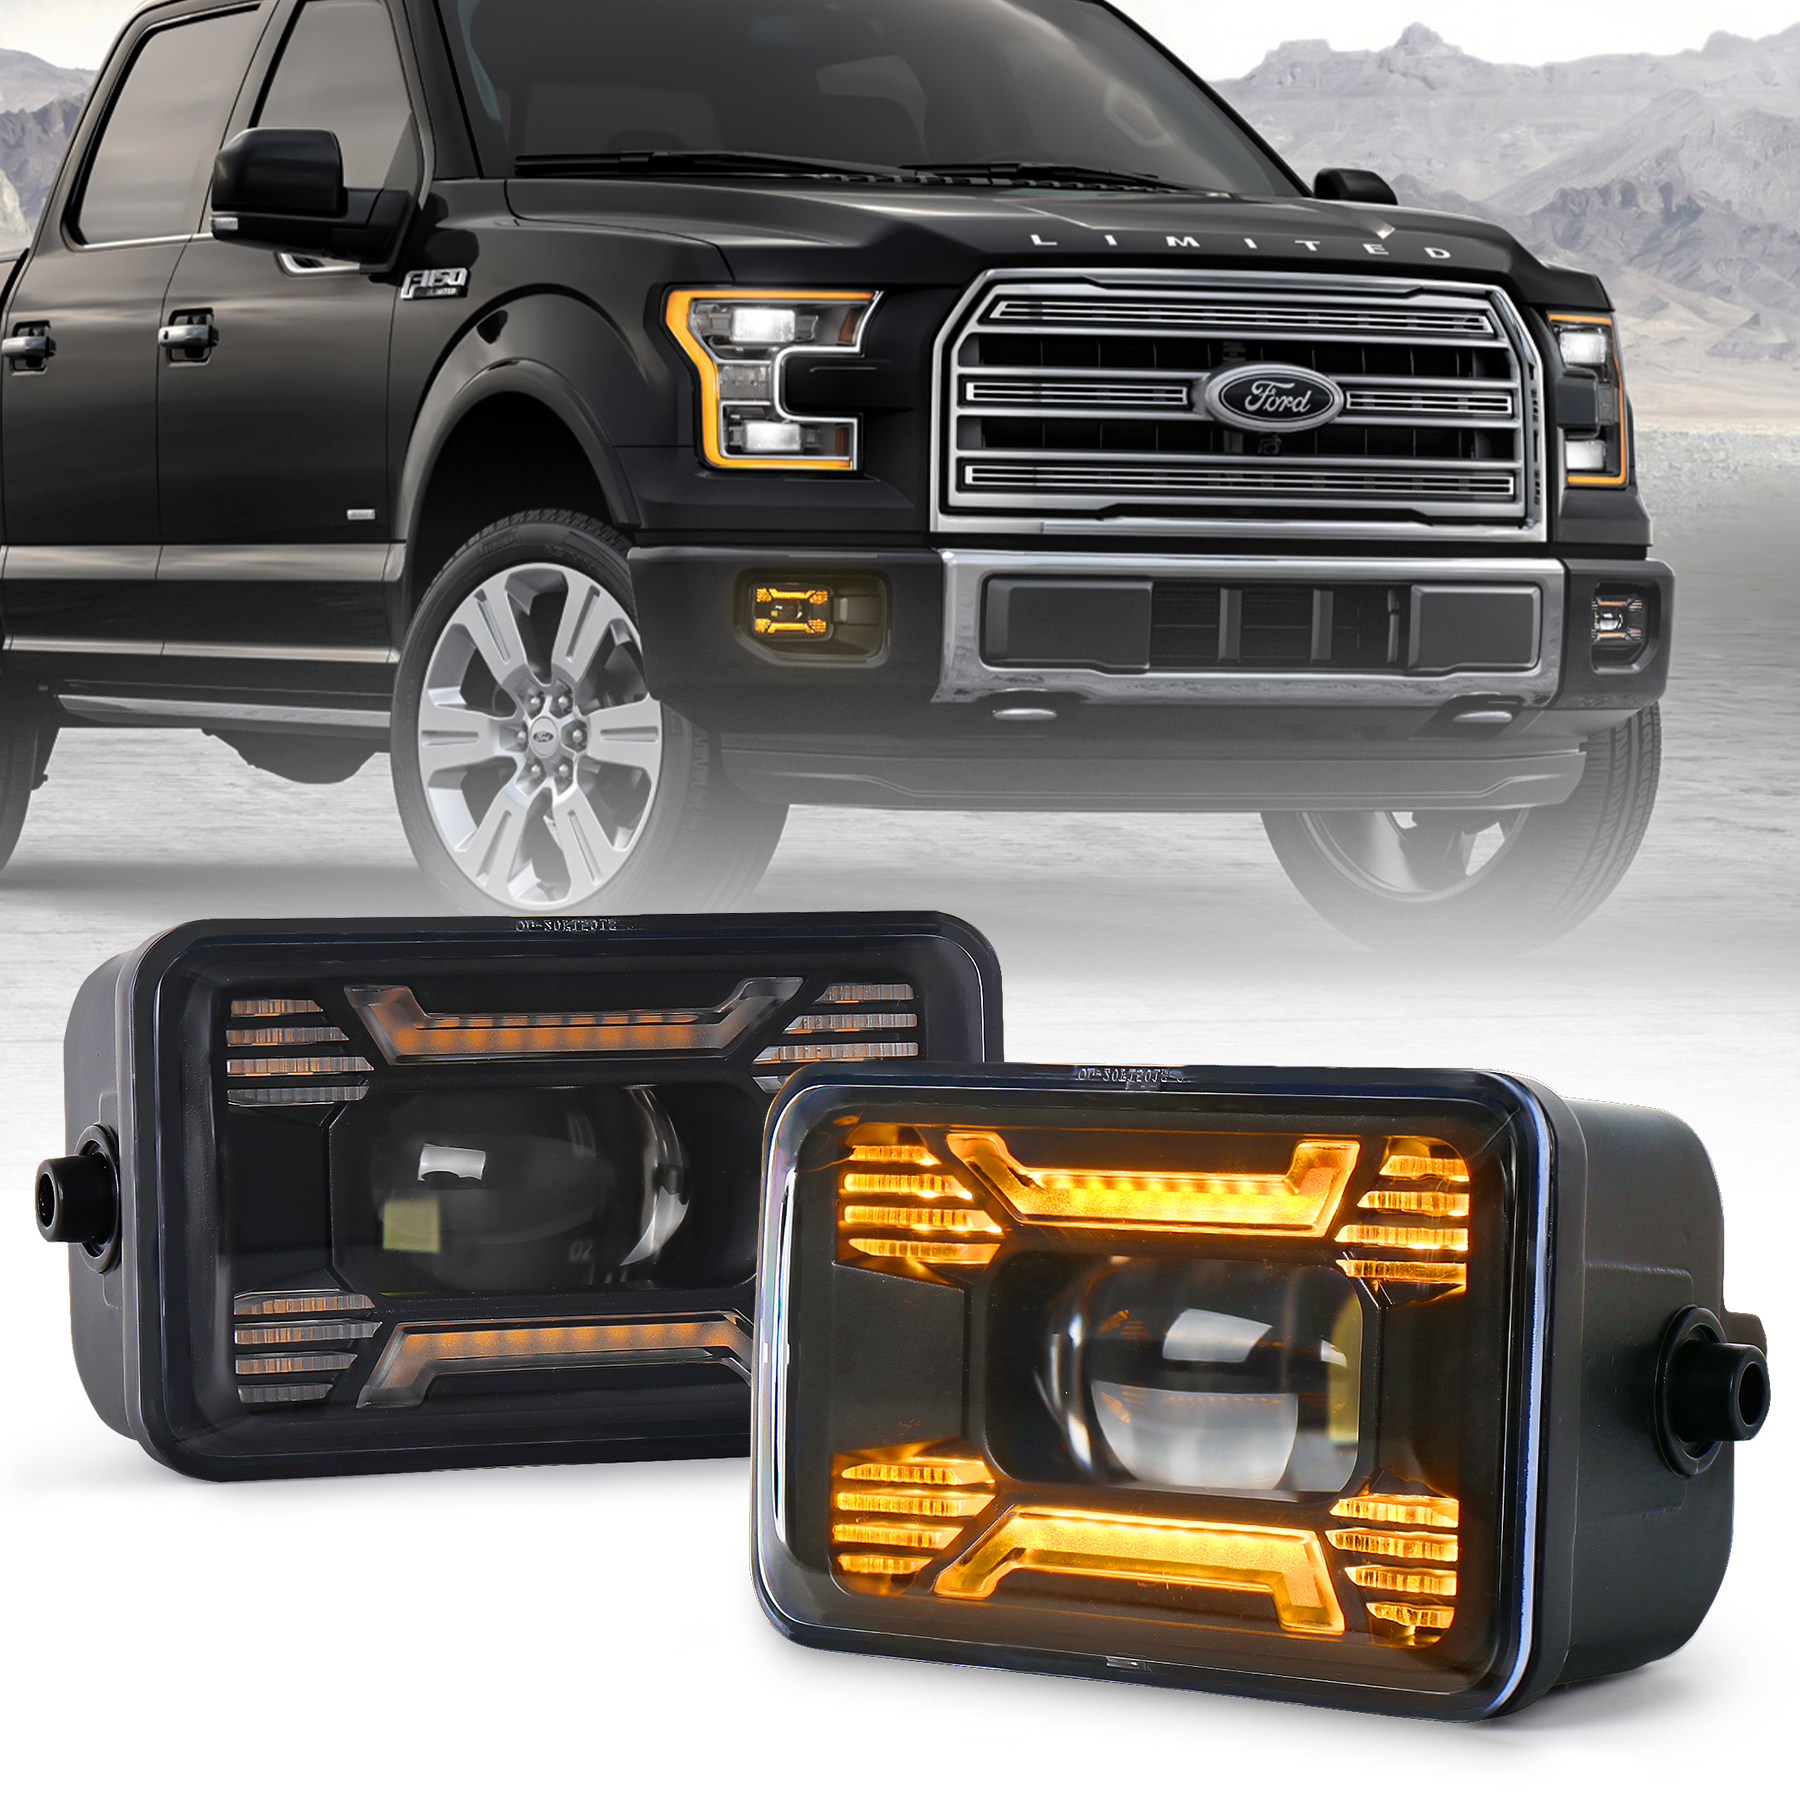 F150 LED Fog Lights, 4inch Fog Lights Upgrade X Design with Amber Turn Signal LED Front Bumper Fog Lamps Compatible with Ford F150 2015-2020 Ford Super Duty 2017 2018